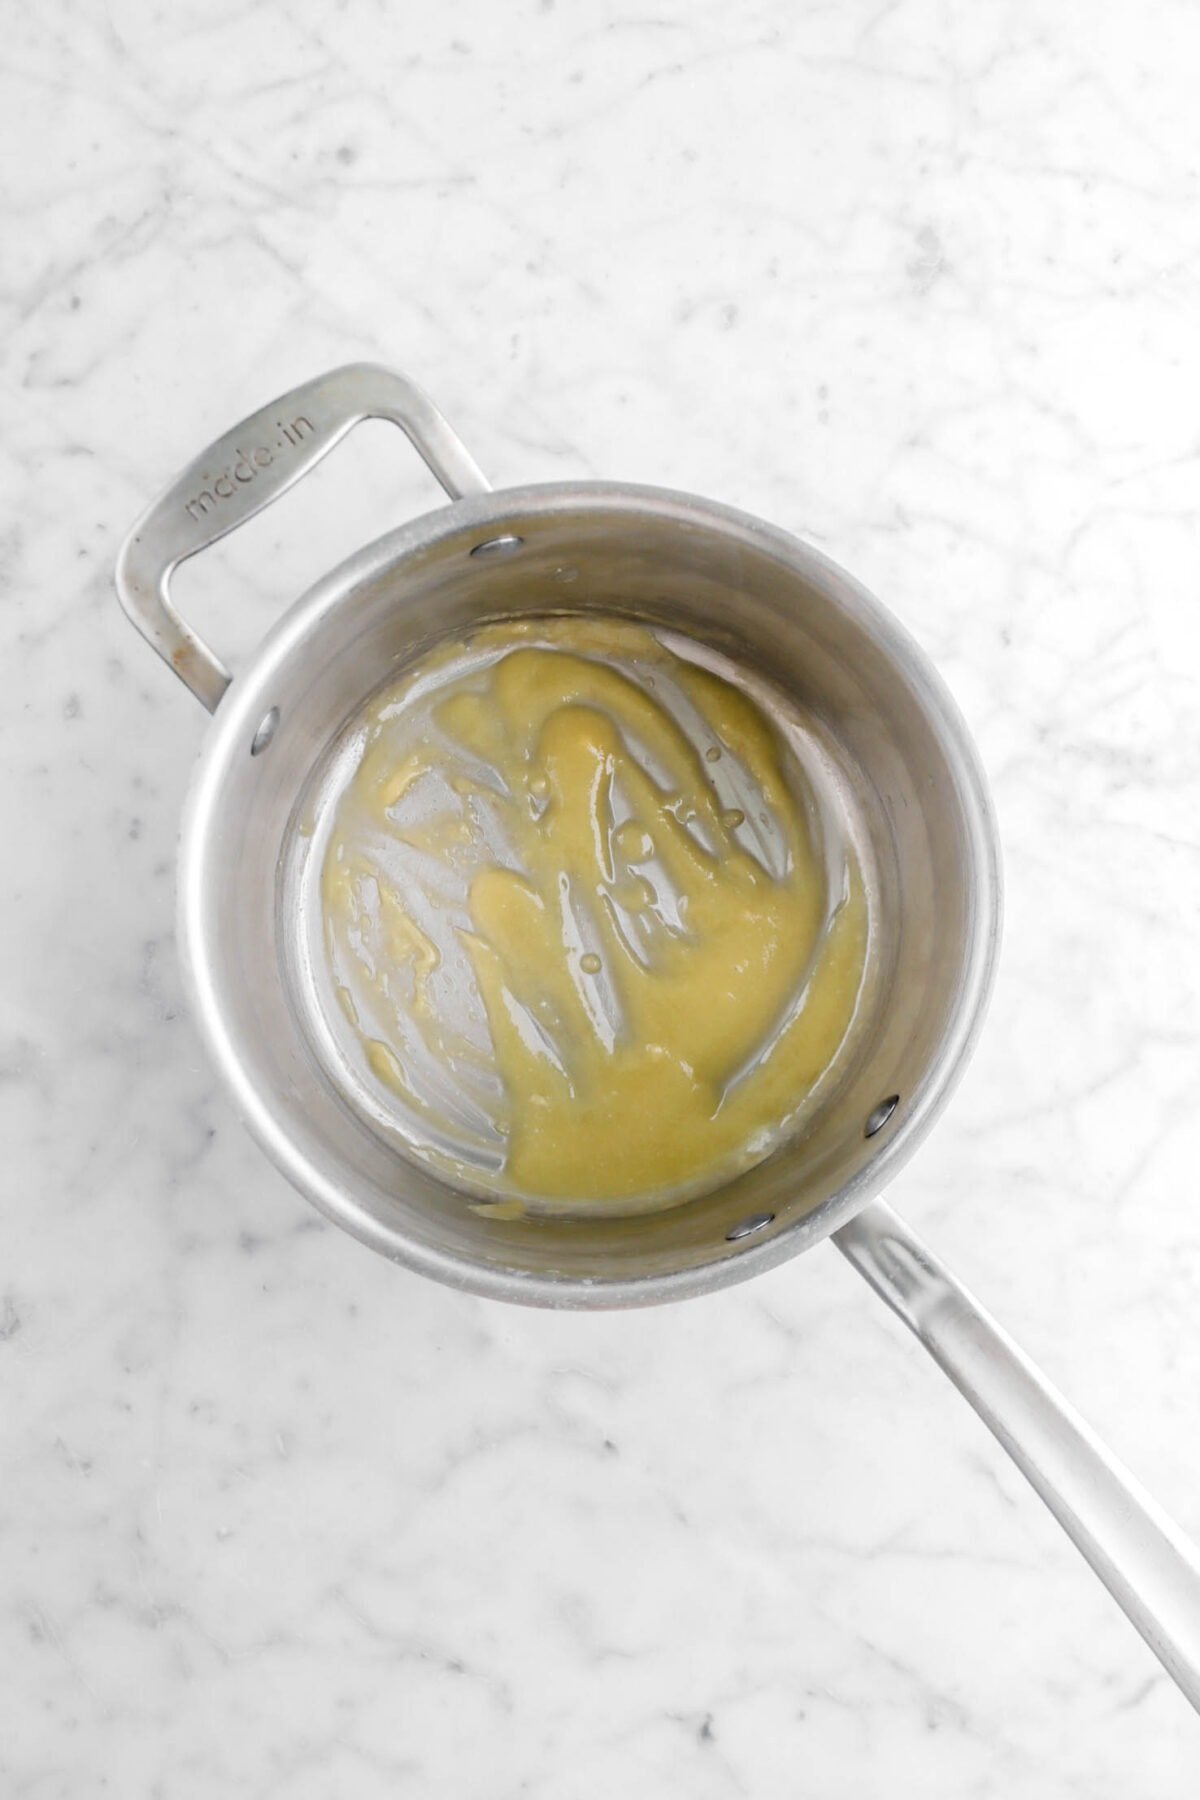 roux in small pot on marble surface